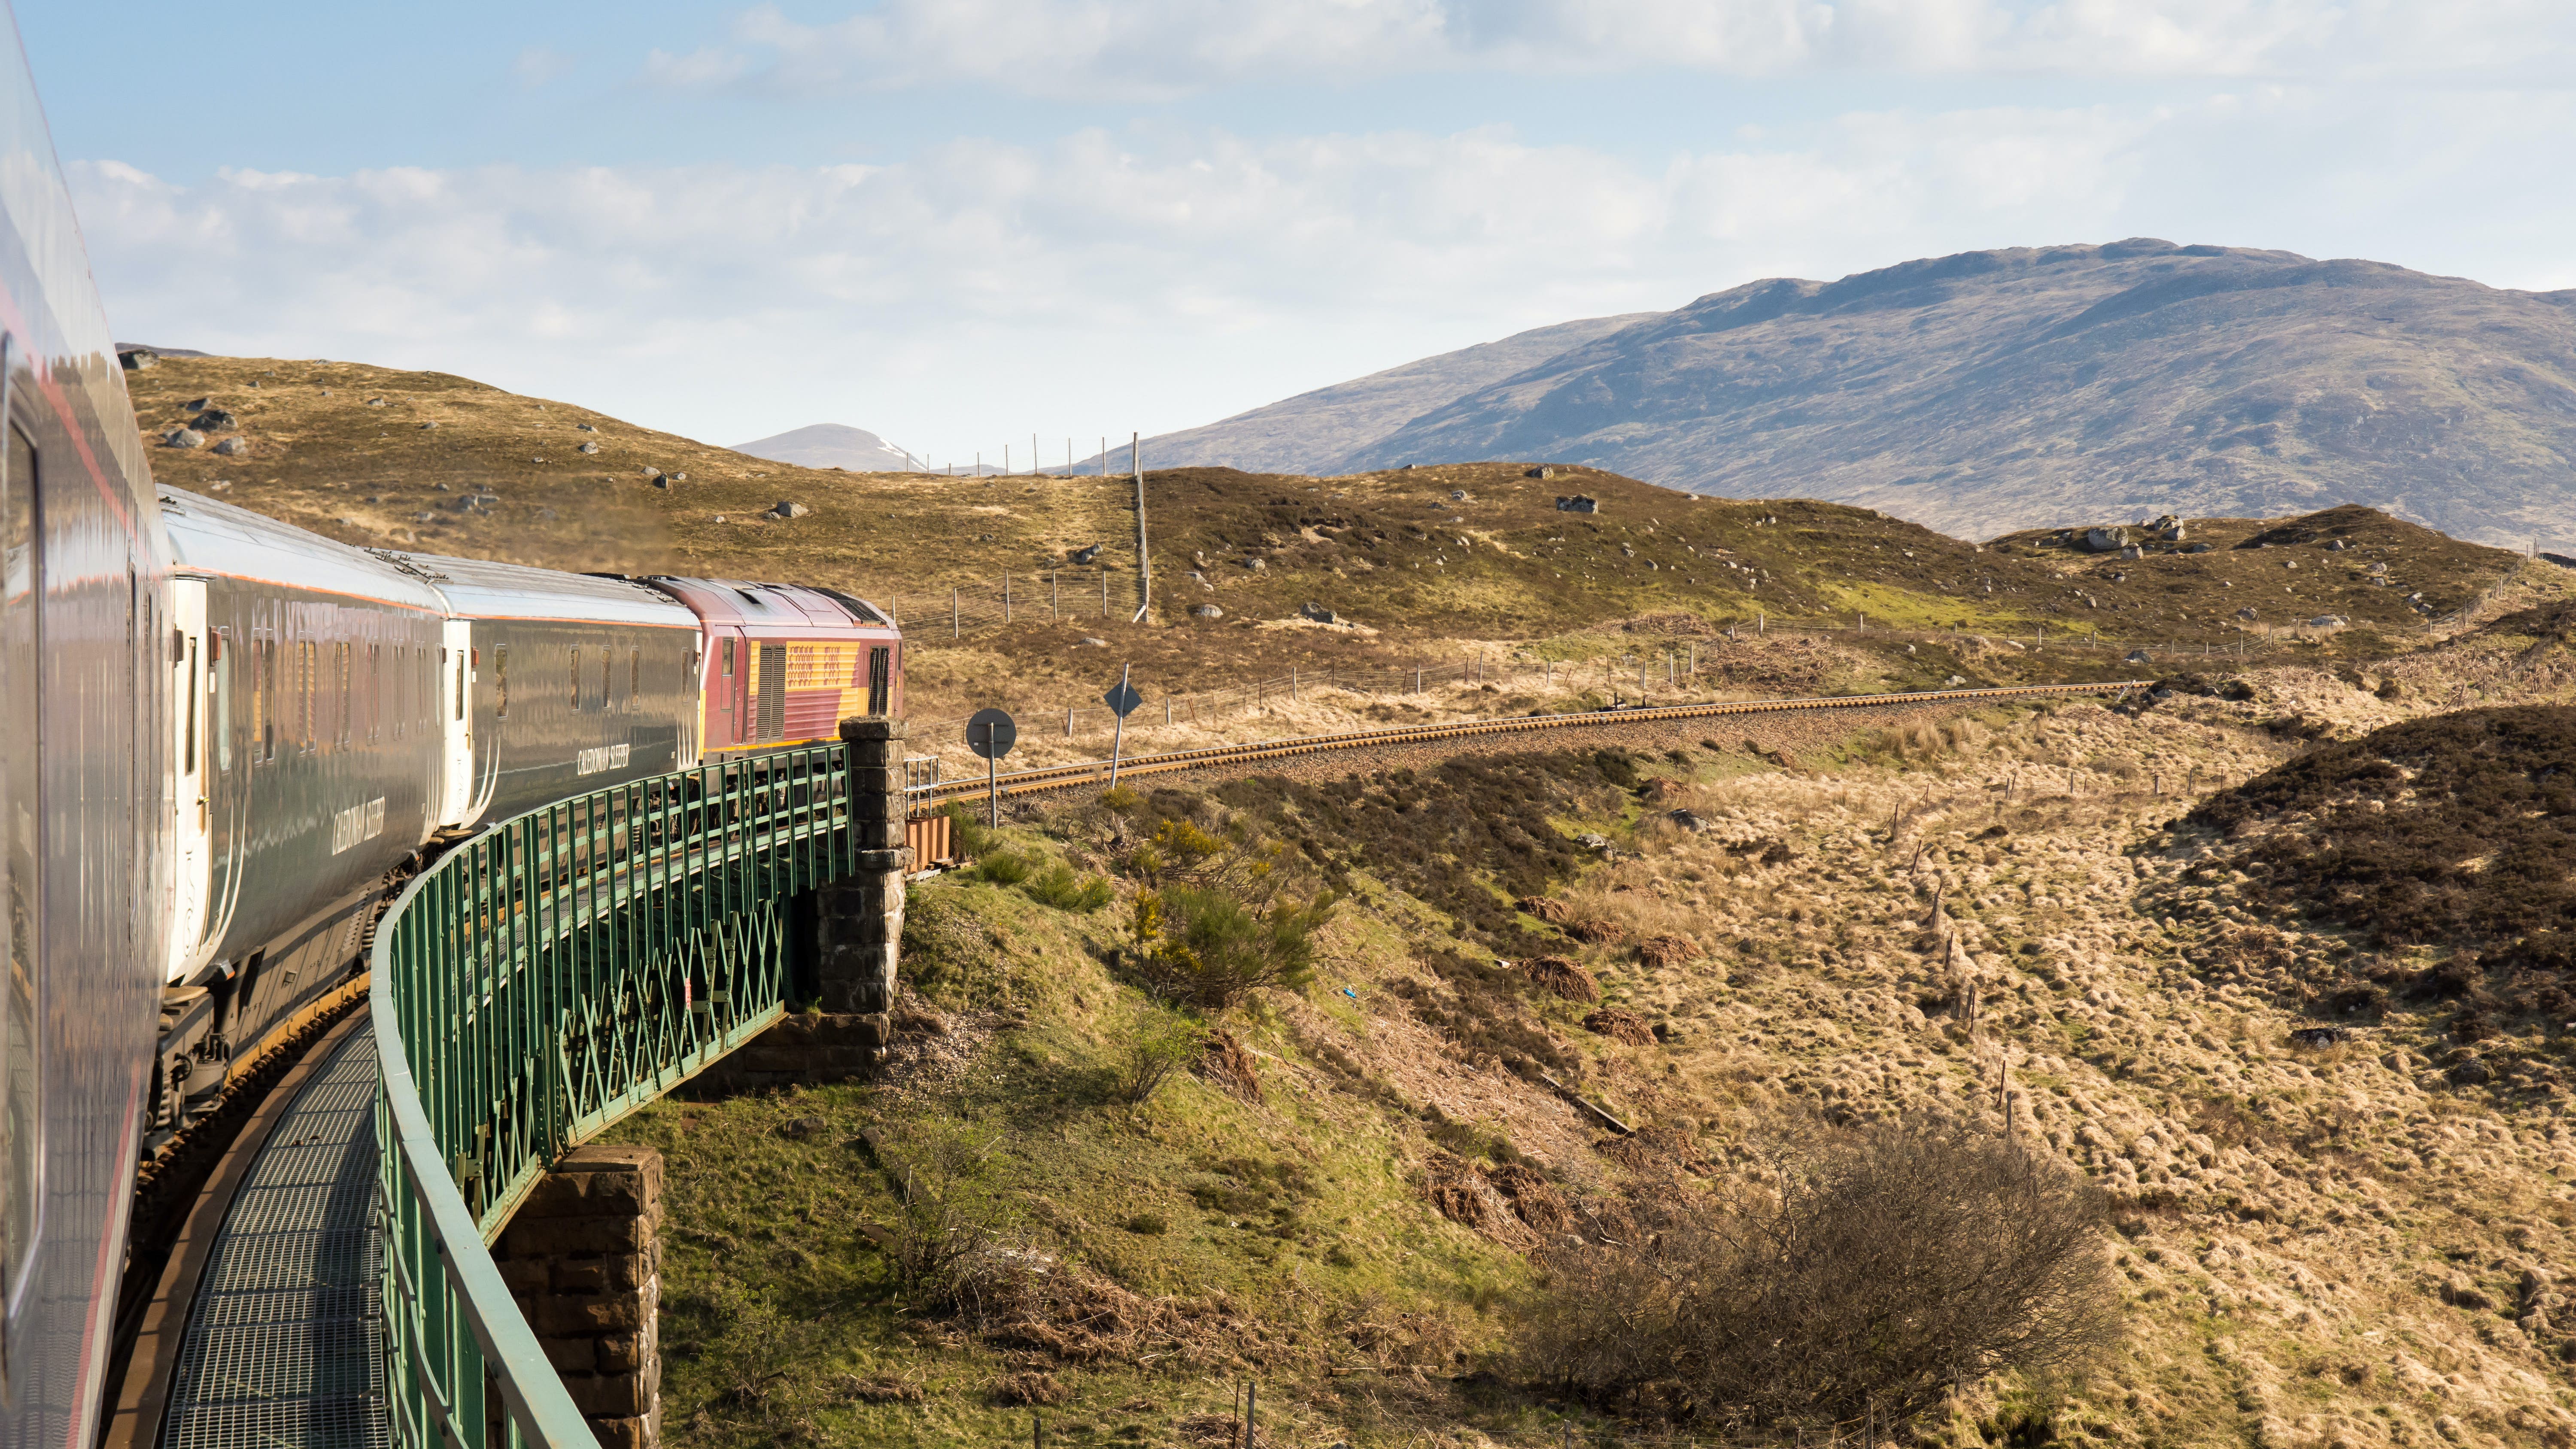 The Caledonian Sleeper train crosses Rannoch Viaduct on the scenic West Highland Line railway in the Scottish Highlands.